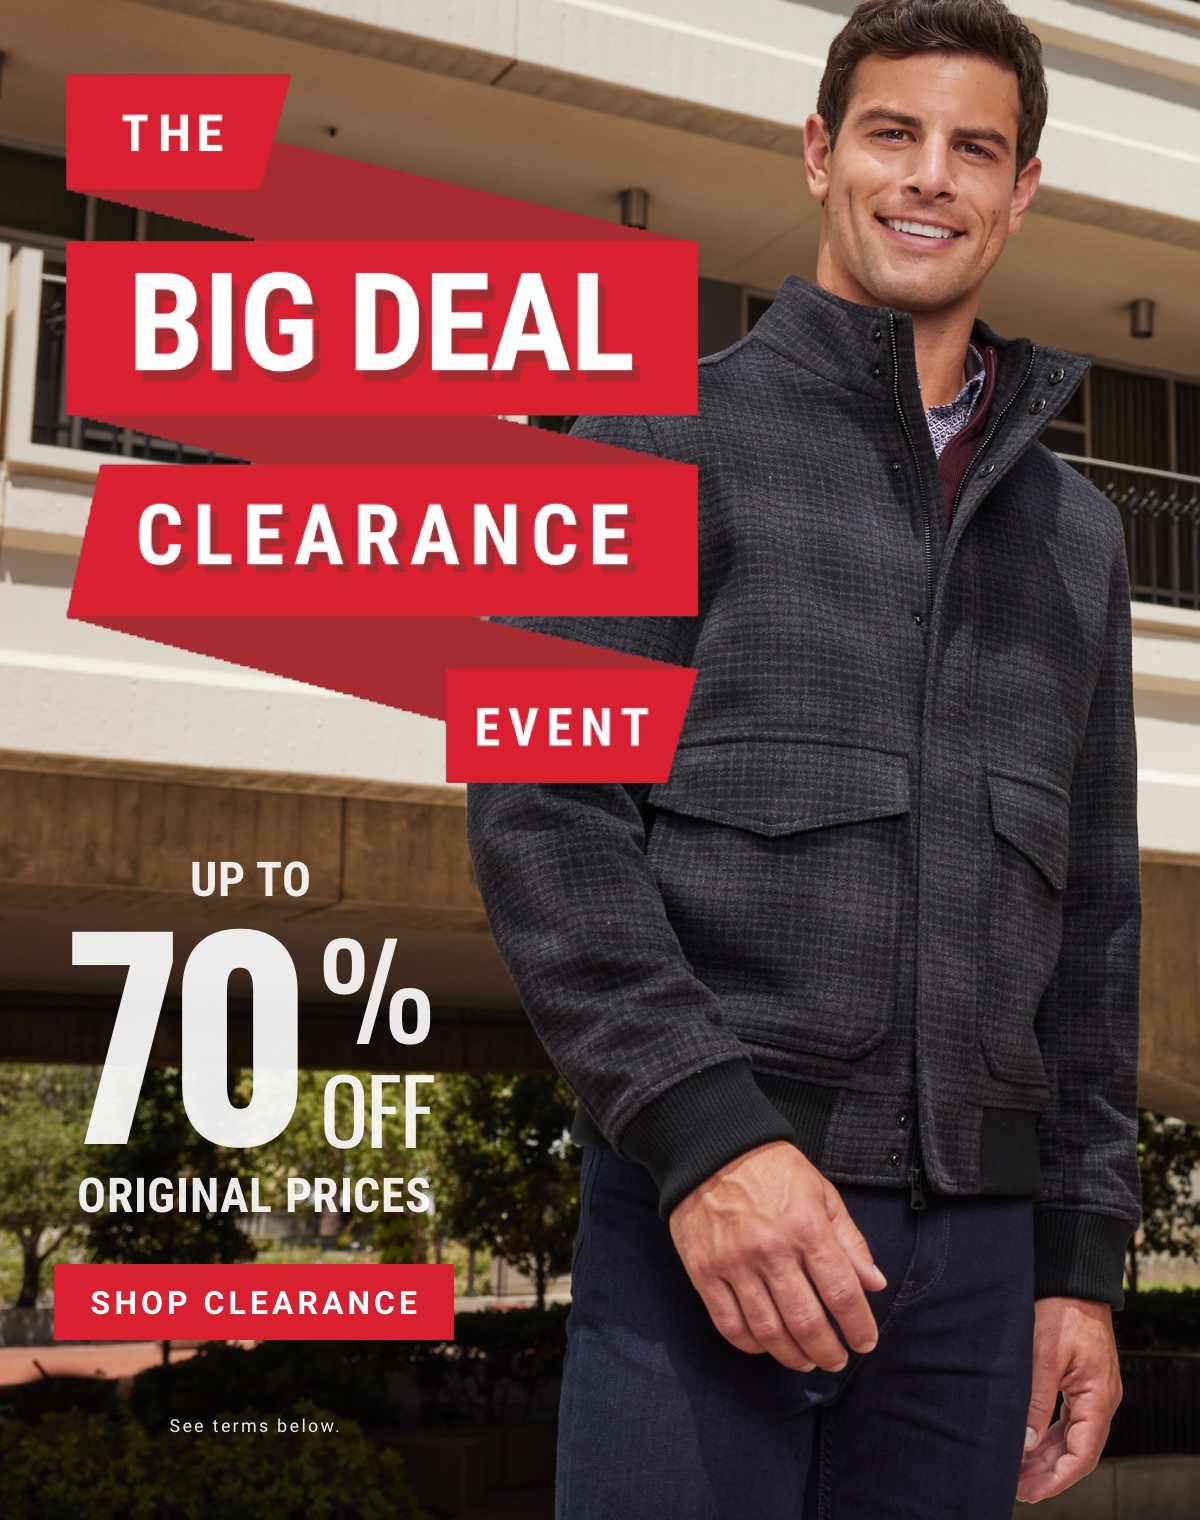 The Big Deal Clearance Event | Up to 70% Off Original Prices | Shop Clearance